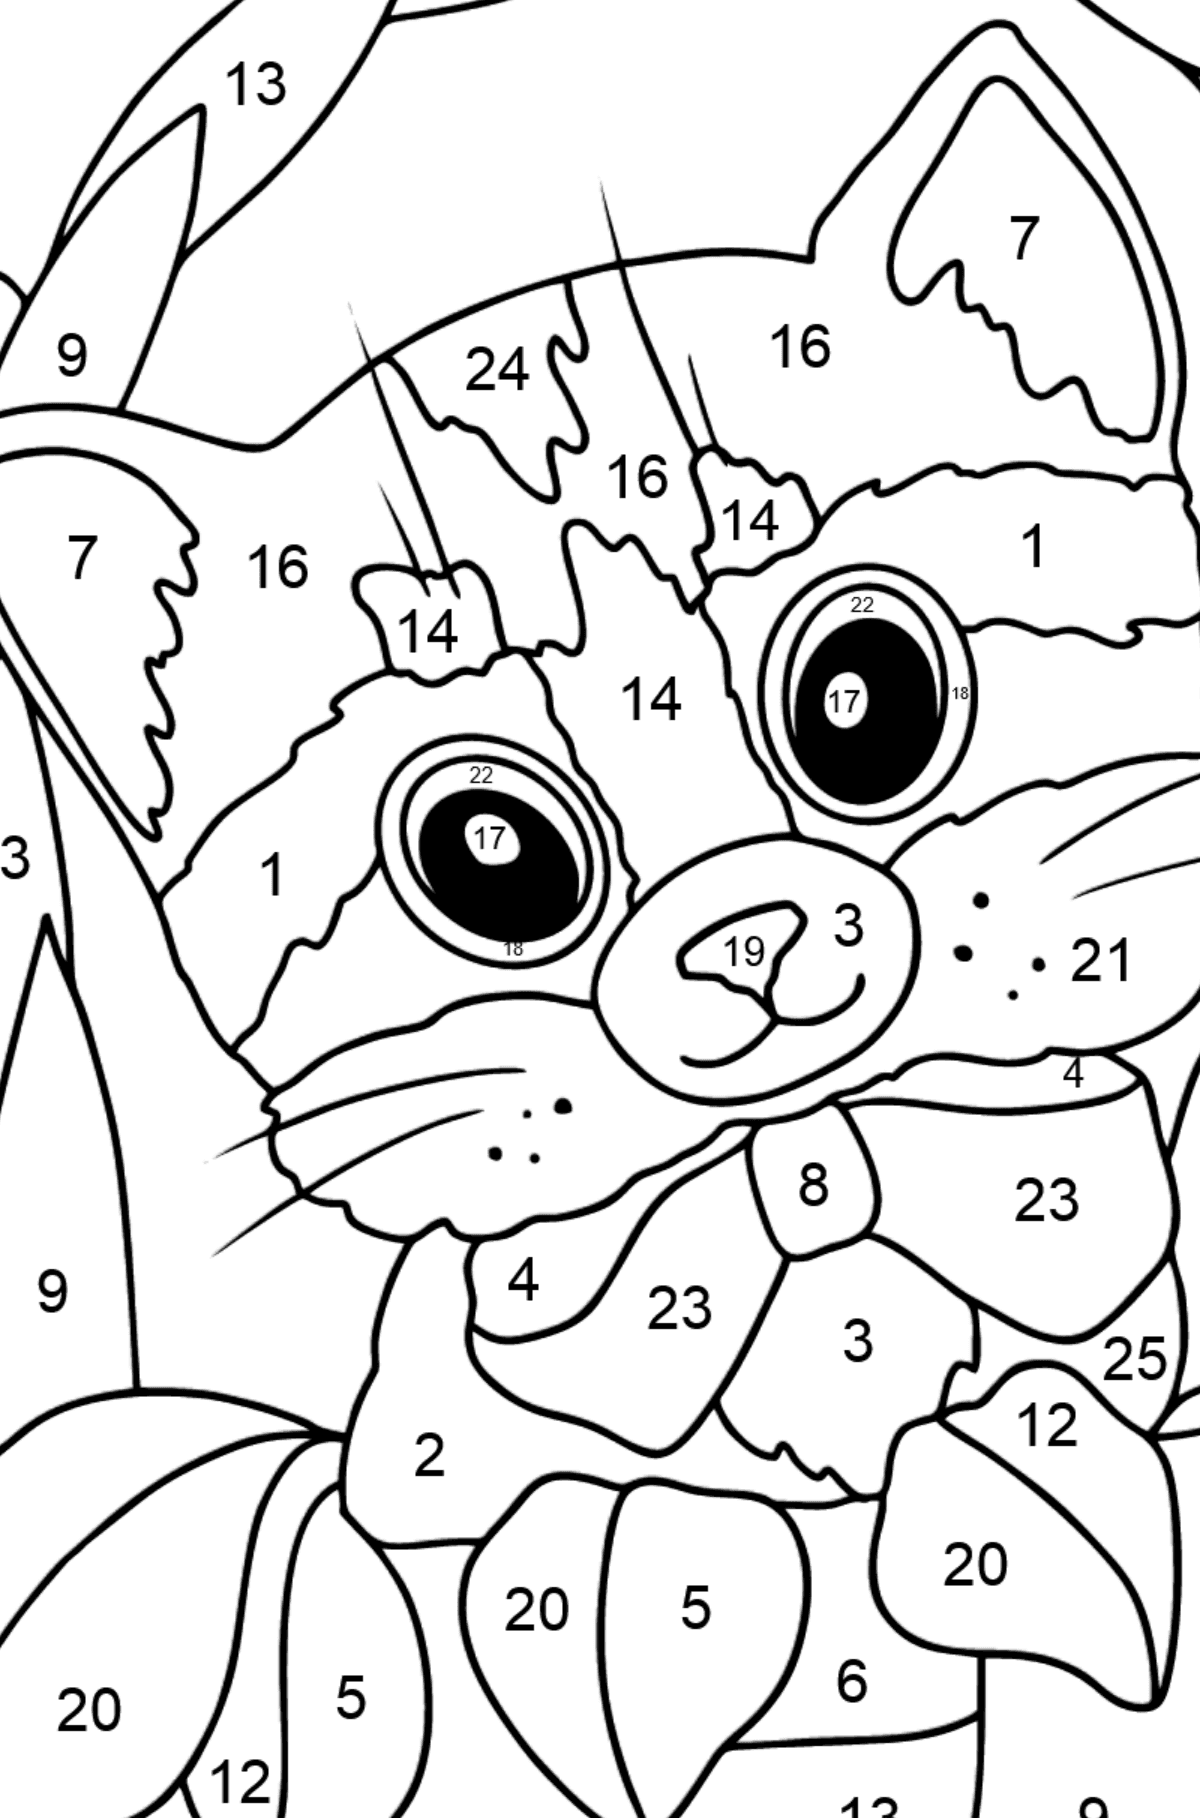 Kitten in a Basket coloring page - Coloring by Numbers for Kids